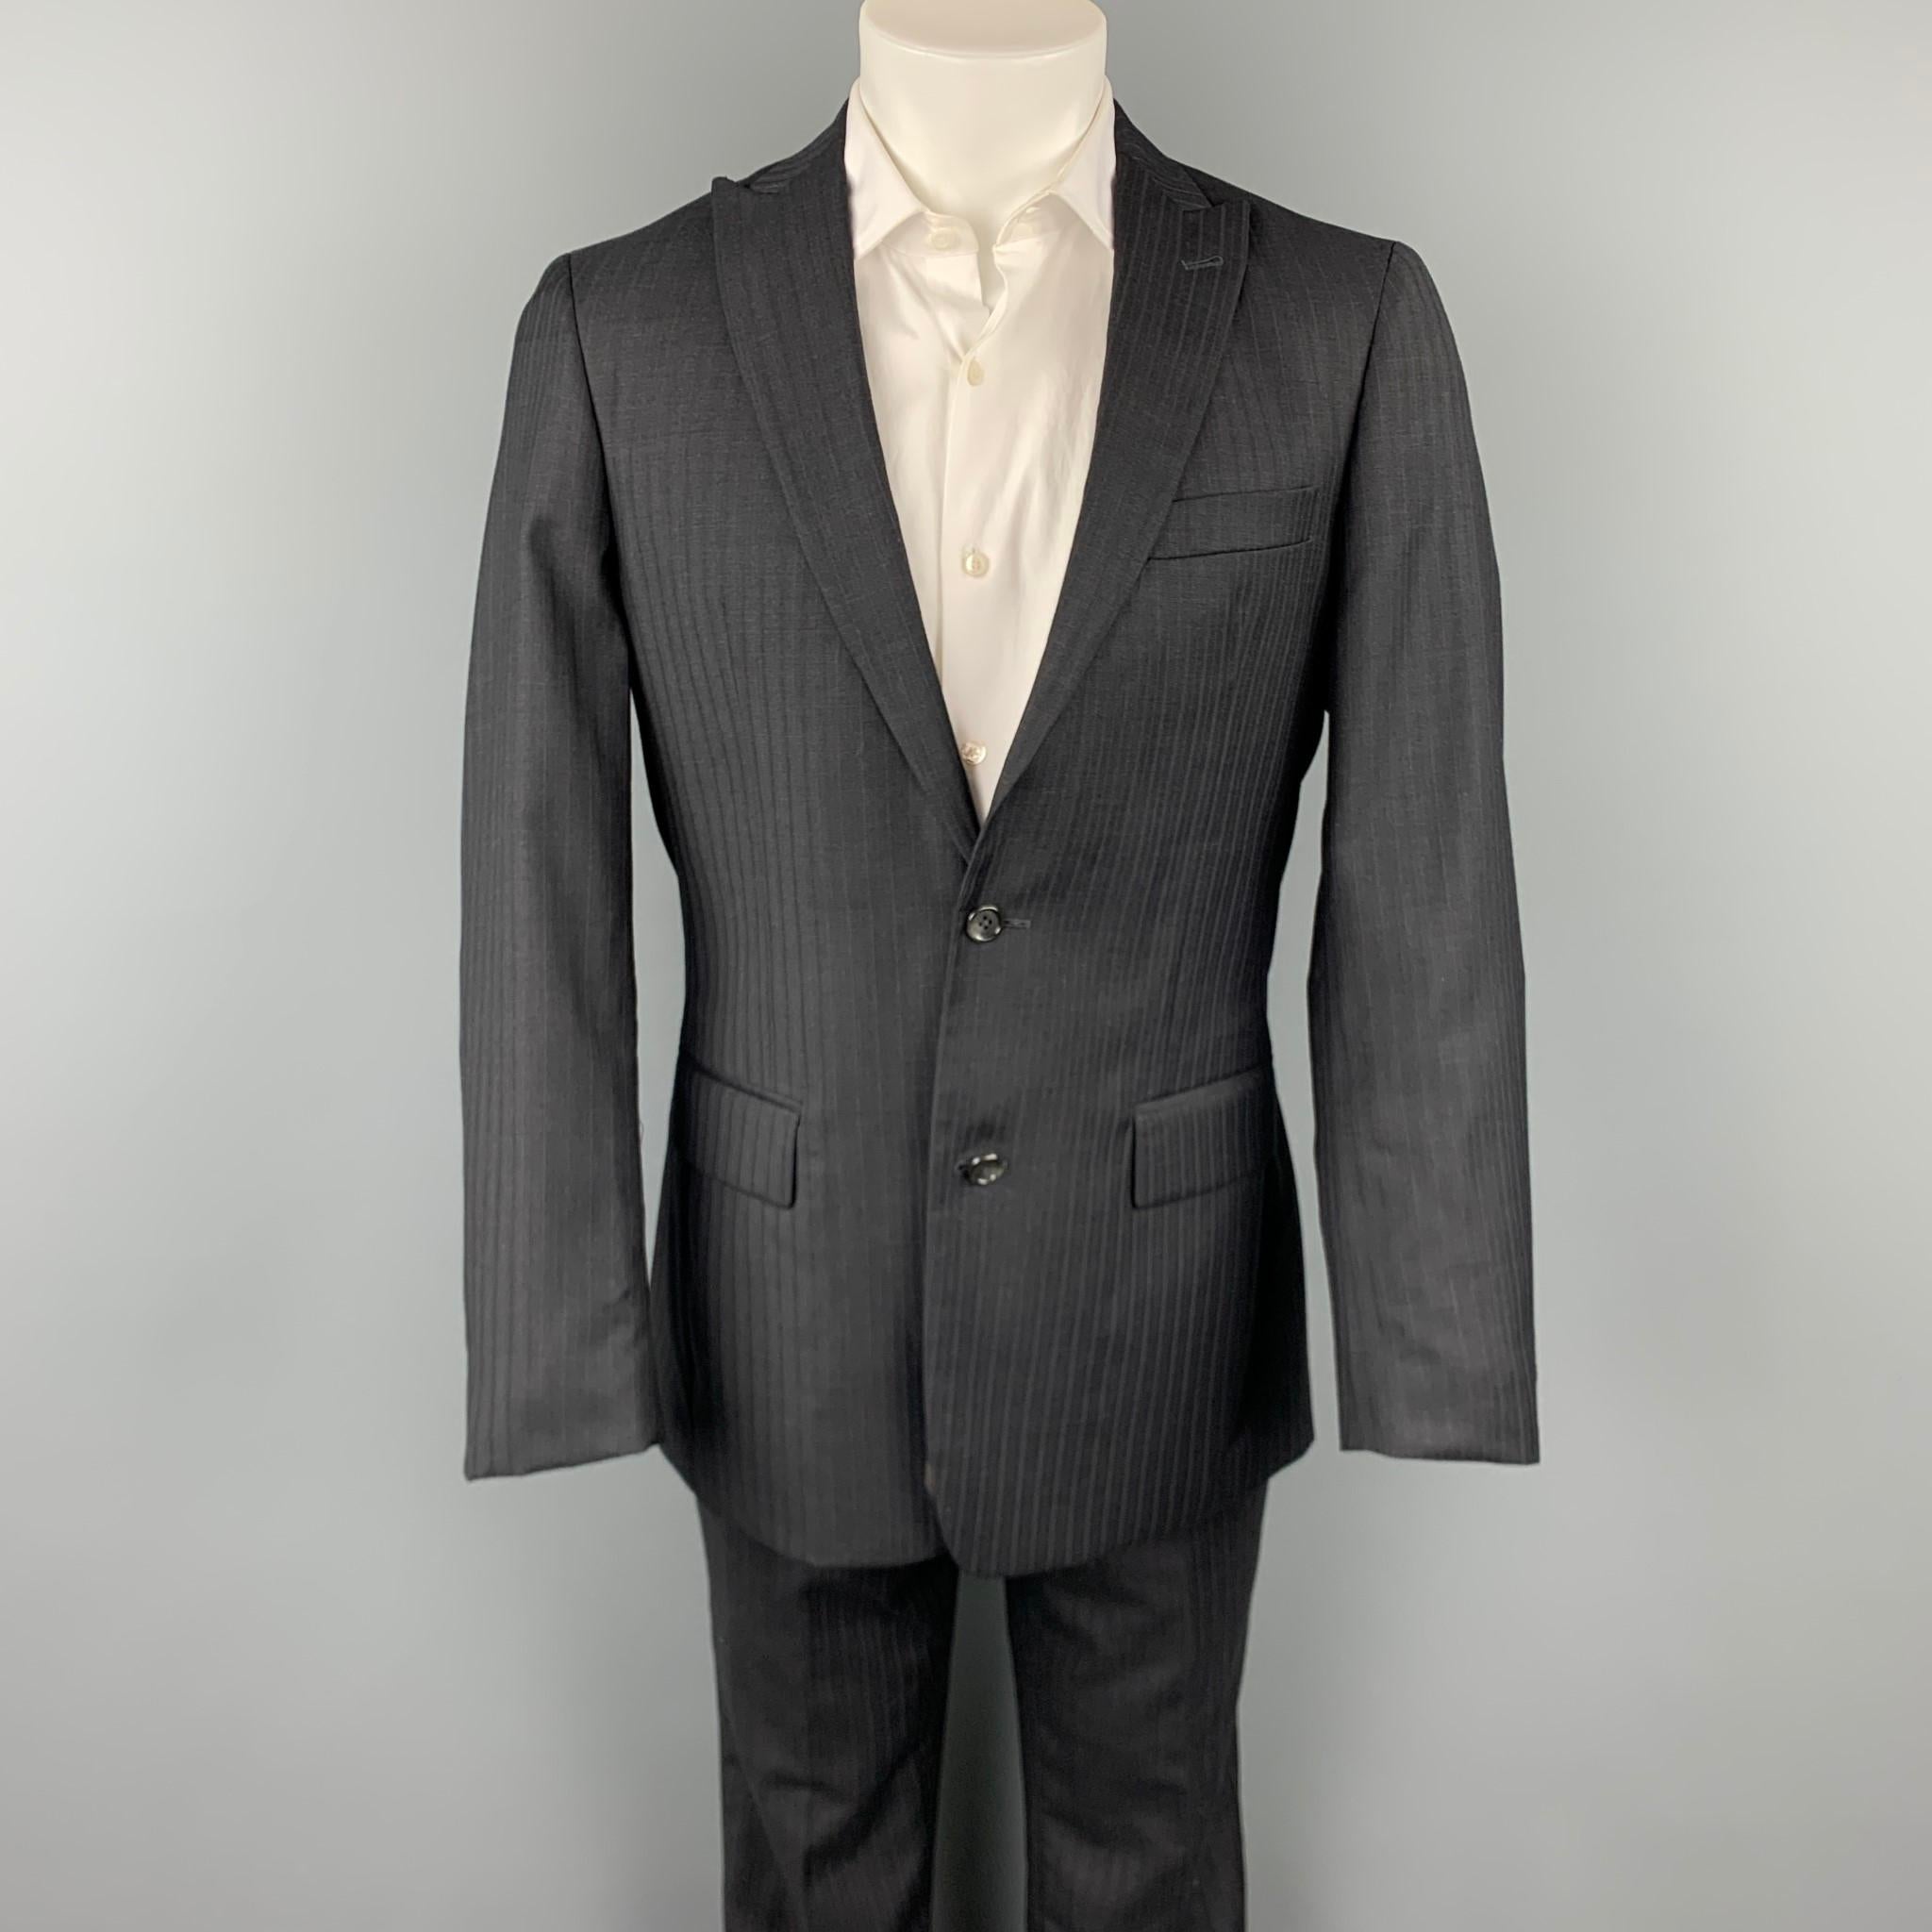 JOHN VARVATOS *U.S.A suit comes in a black wool with a full liner and includes a single breasted, two button sport coat with a notch lapel and matching flat front trousers. 

Very Good Pre-Owned Condition.
Marked: